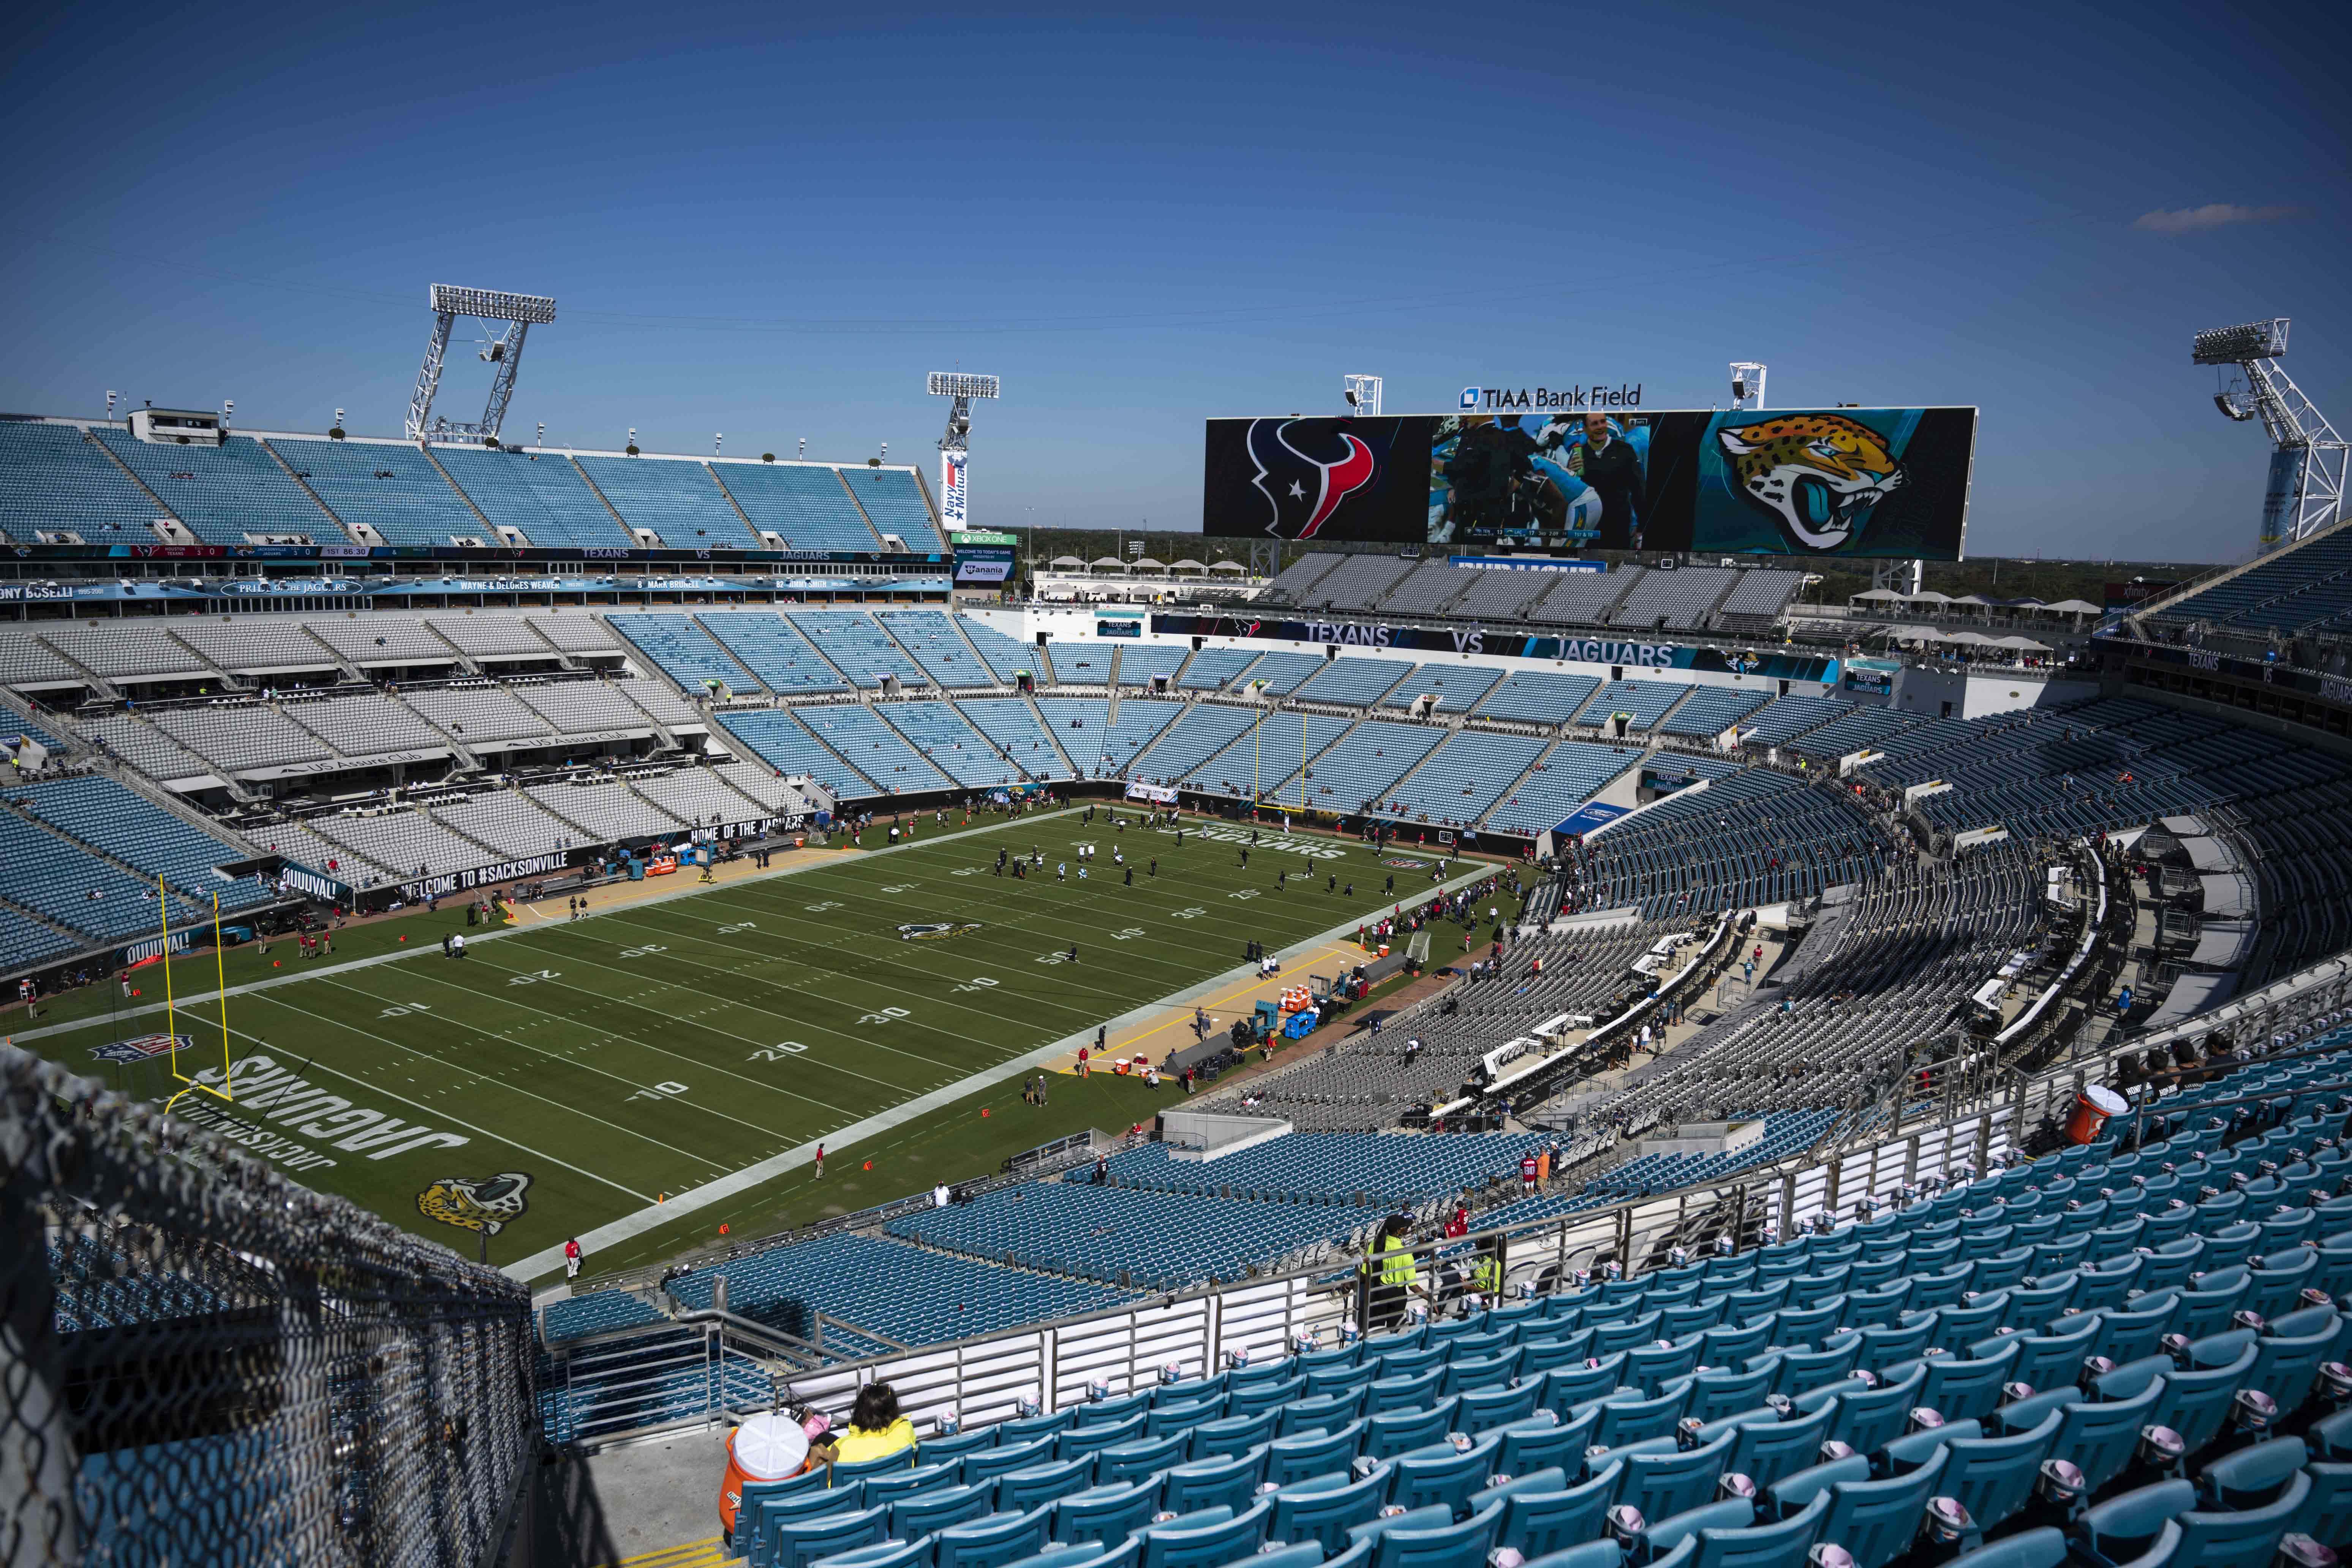 Jacksonville Mayor Lenny Curry Closes Events at TIAA Bank Field Due to